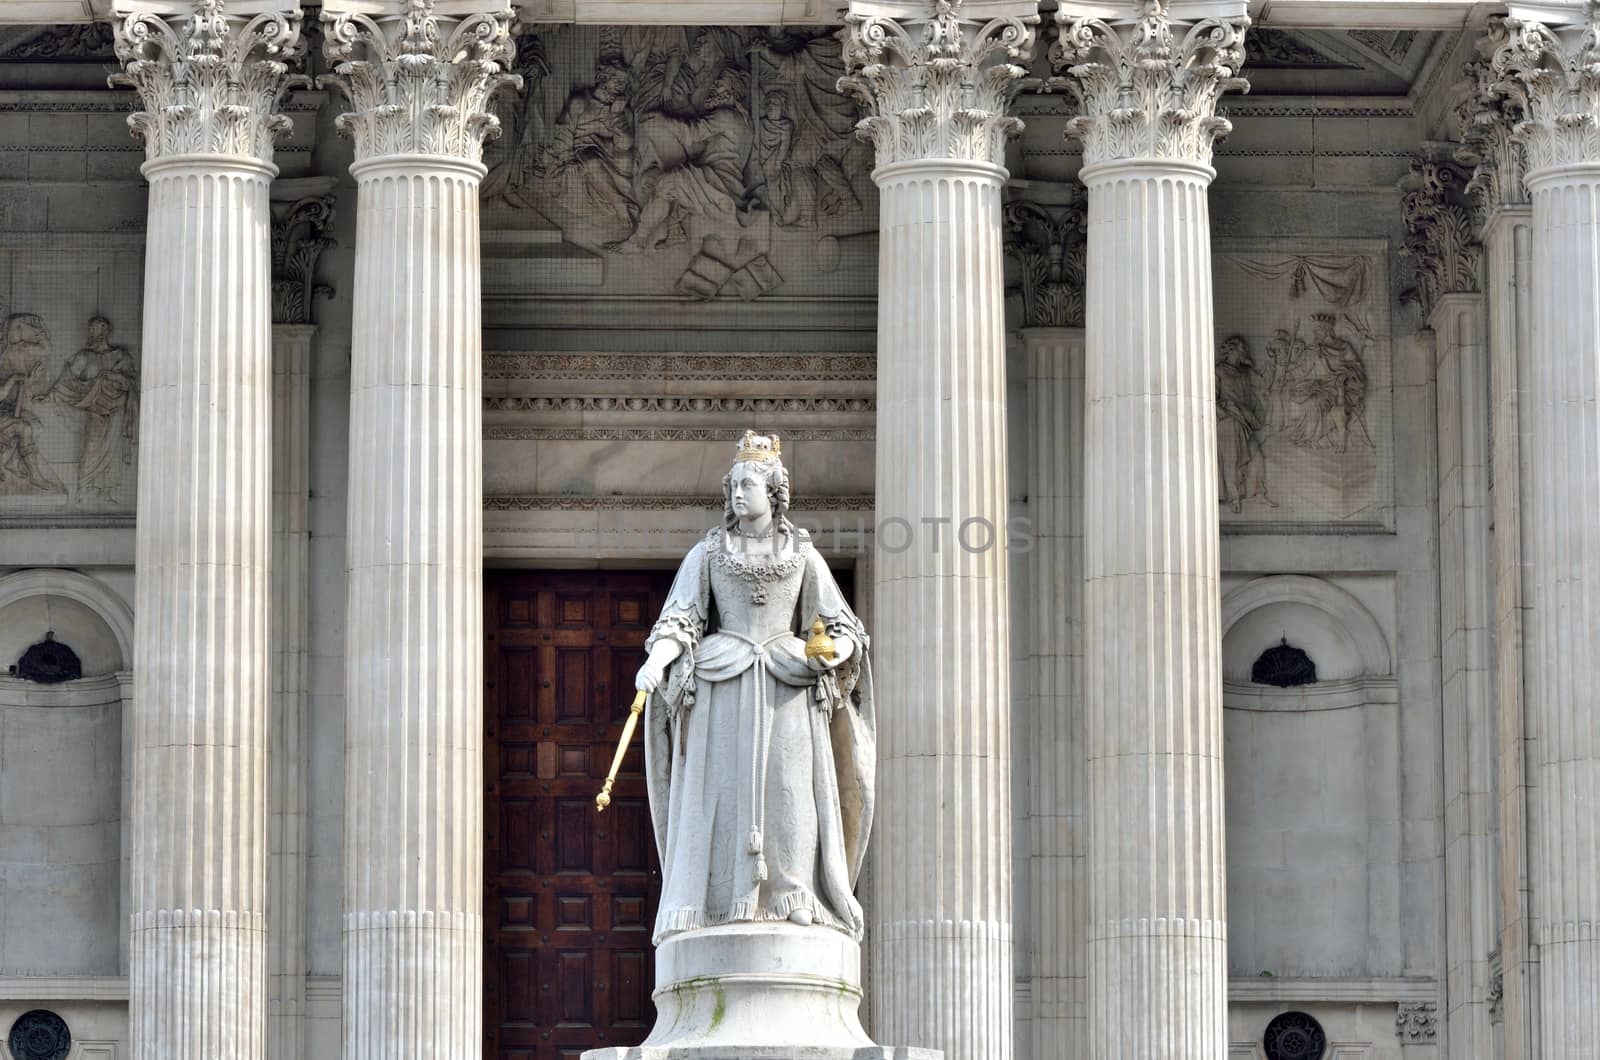 Statue of Queen Victoria in front of St Pauls with columns by pauws99